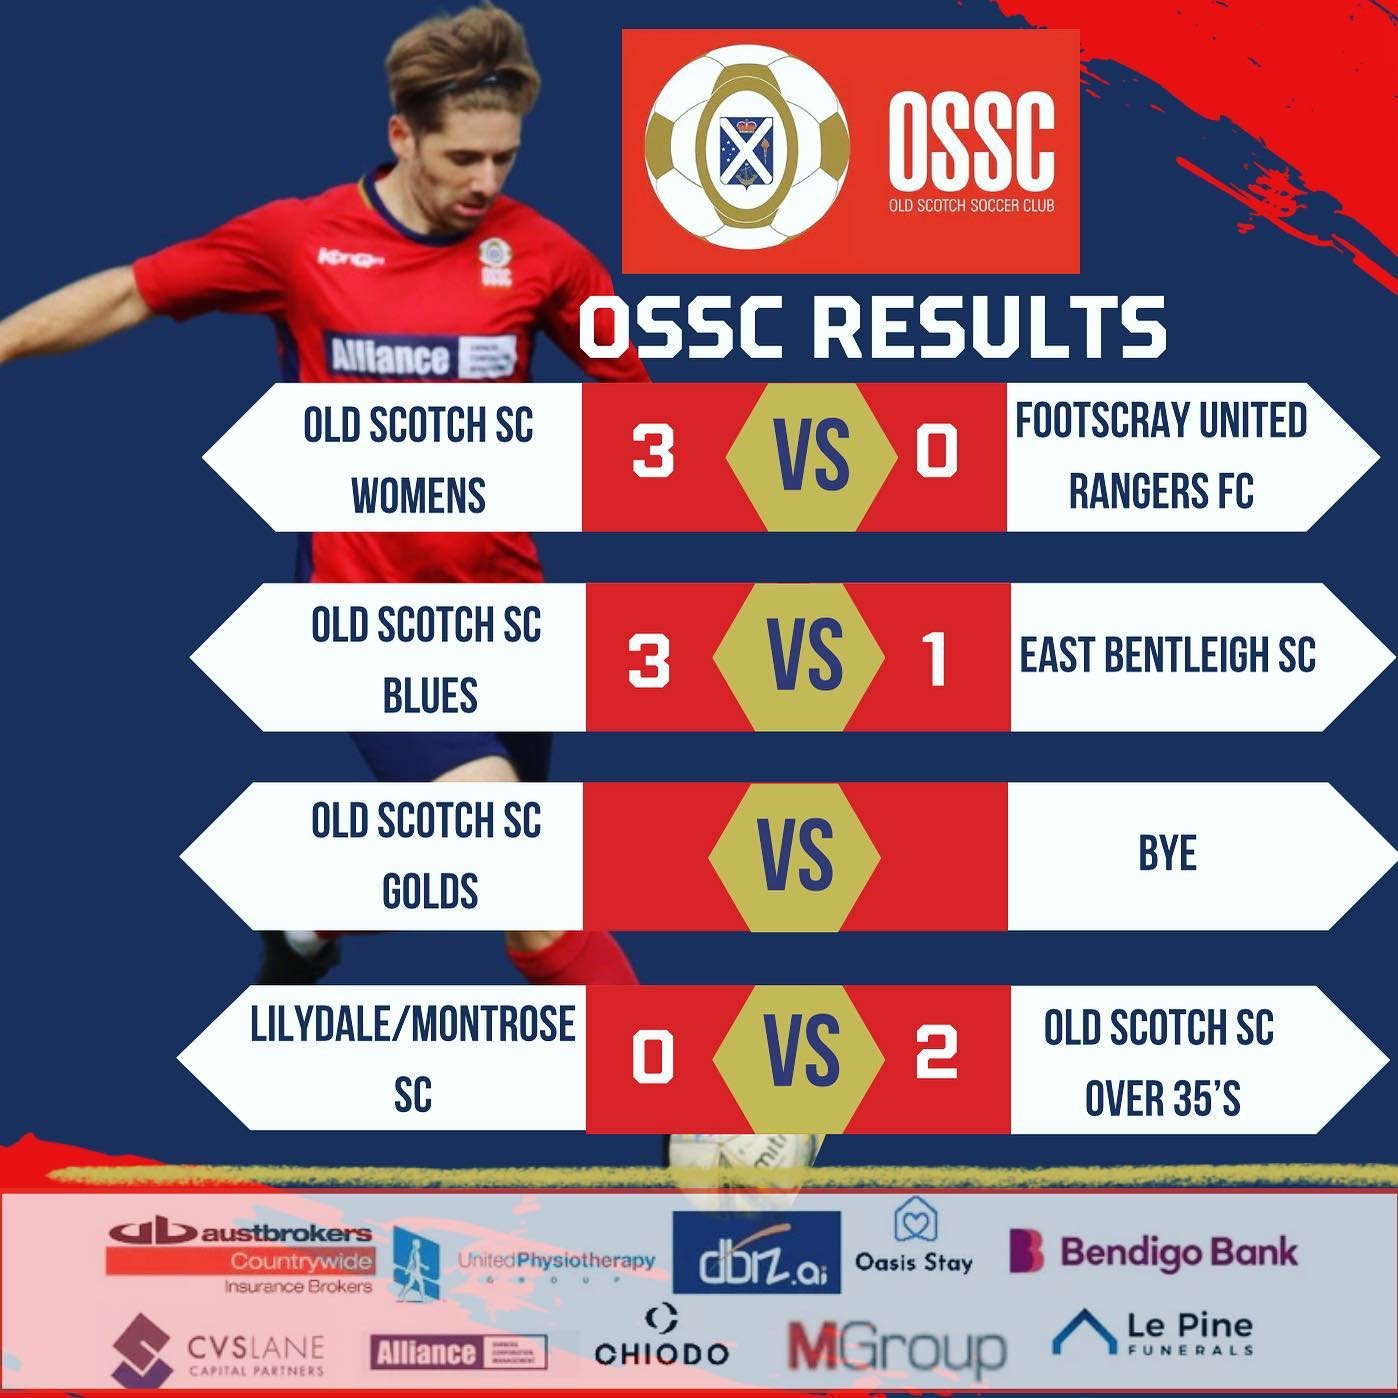 Weekend results for our Friday and Sunday teams. 

#ossc